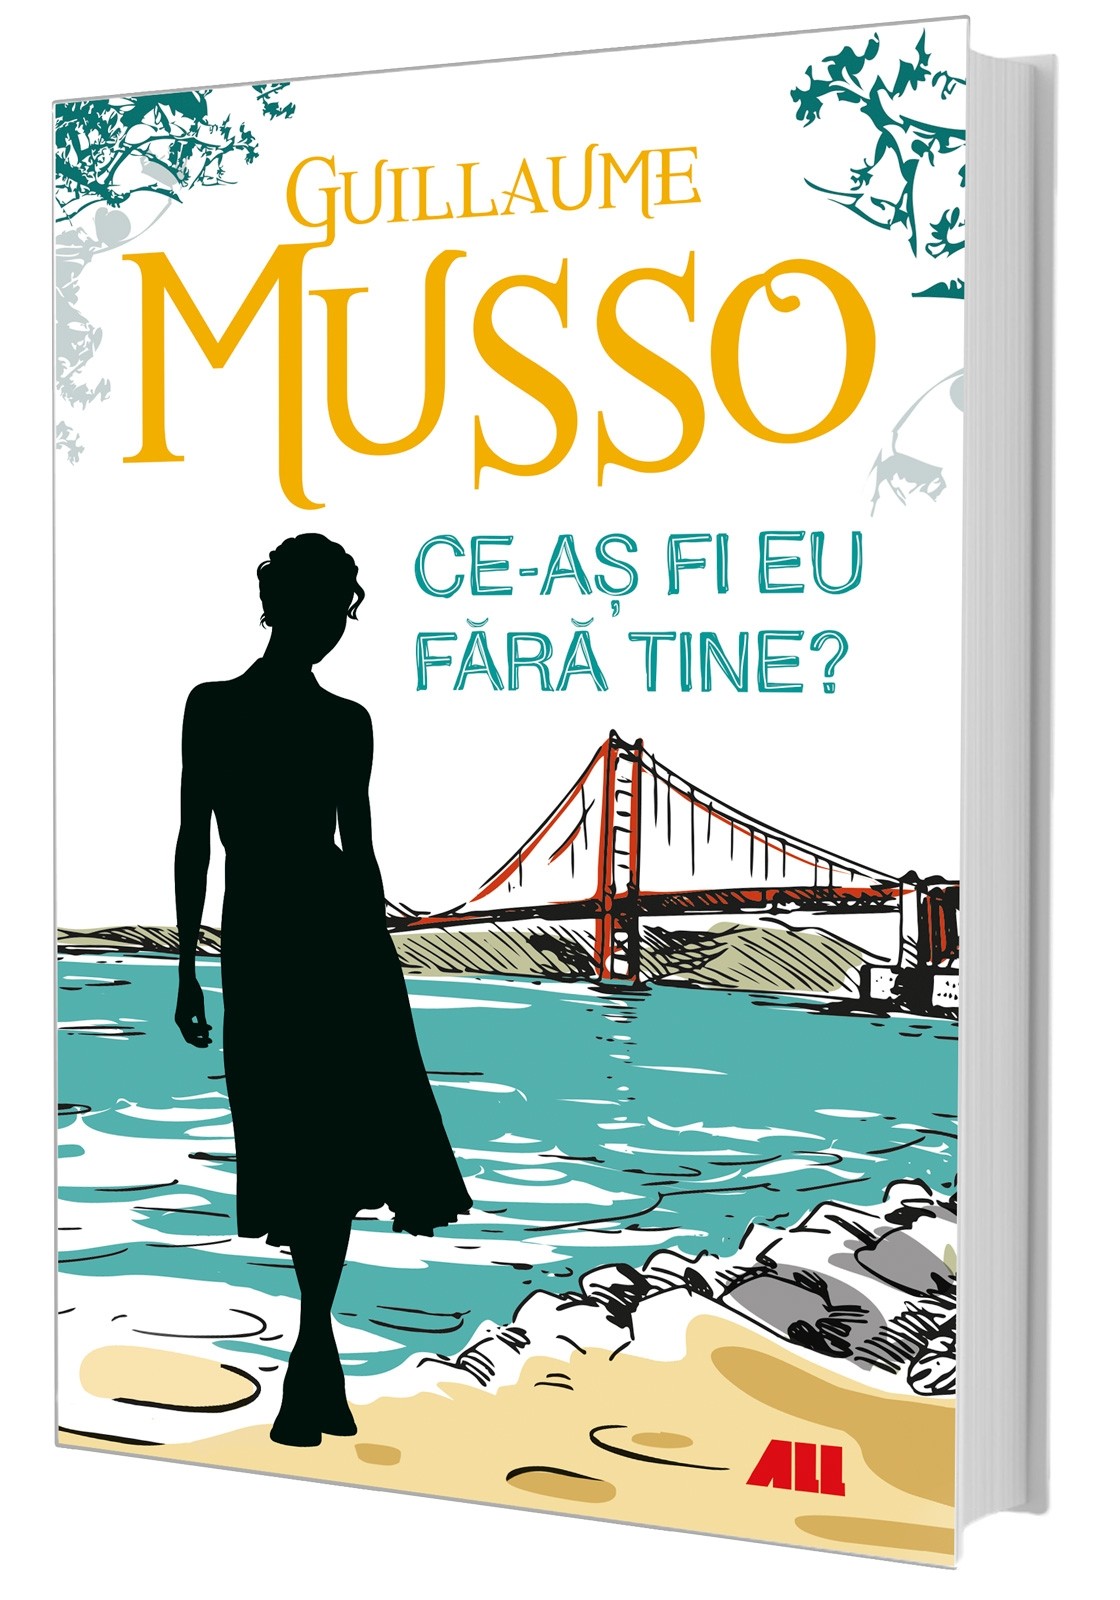 Ce-as fi eu fara tine? | Guillaume Musso ALL poza bestsellers.ro